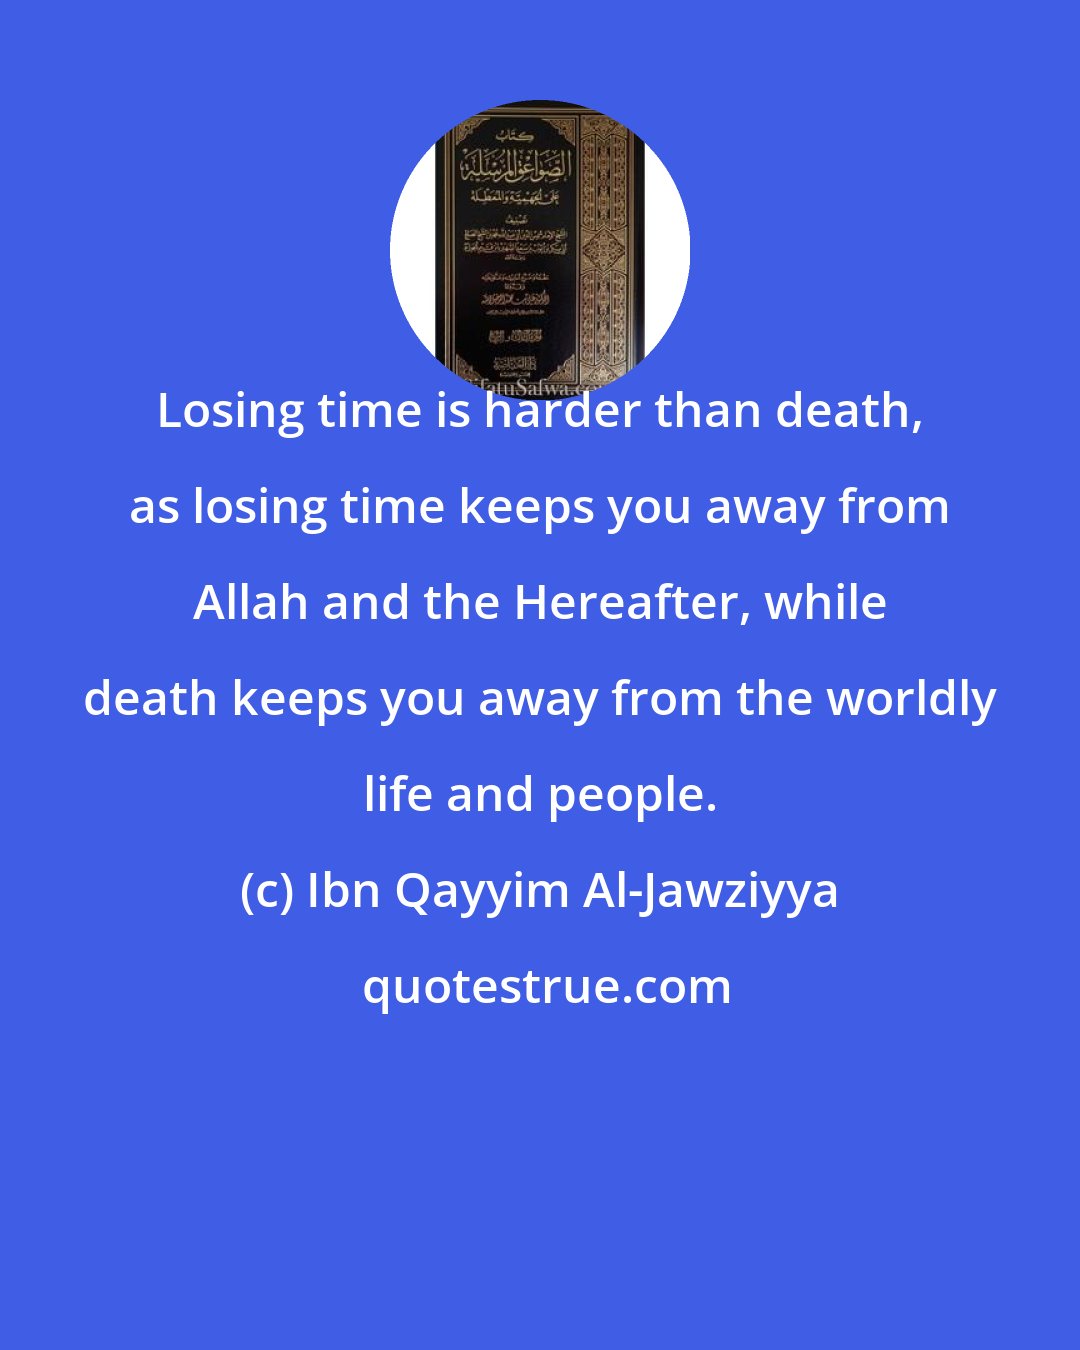 Ibn Qayyim Al-Jawziyya: Losing time is harder than death, as losing time keeps you away from Allah and the Hereafter, while death keeps you away from the worldly life and people.